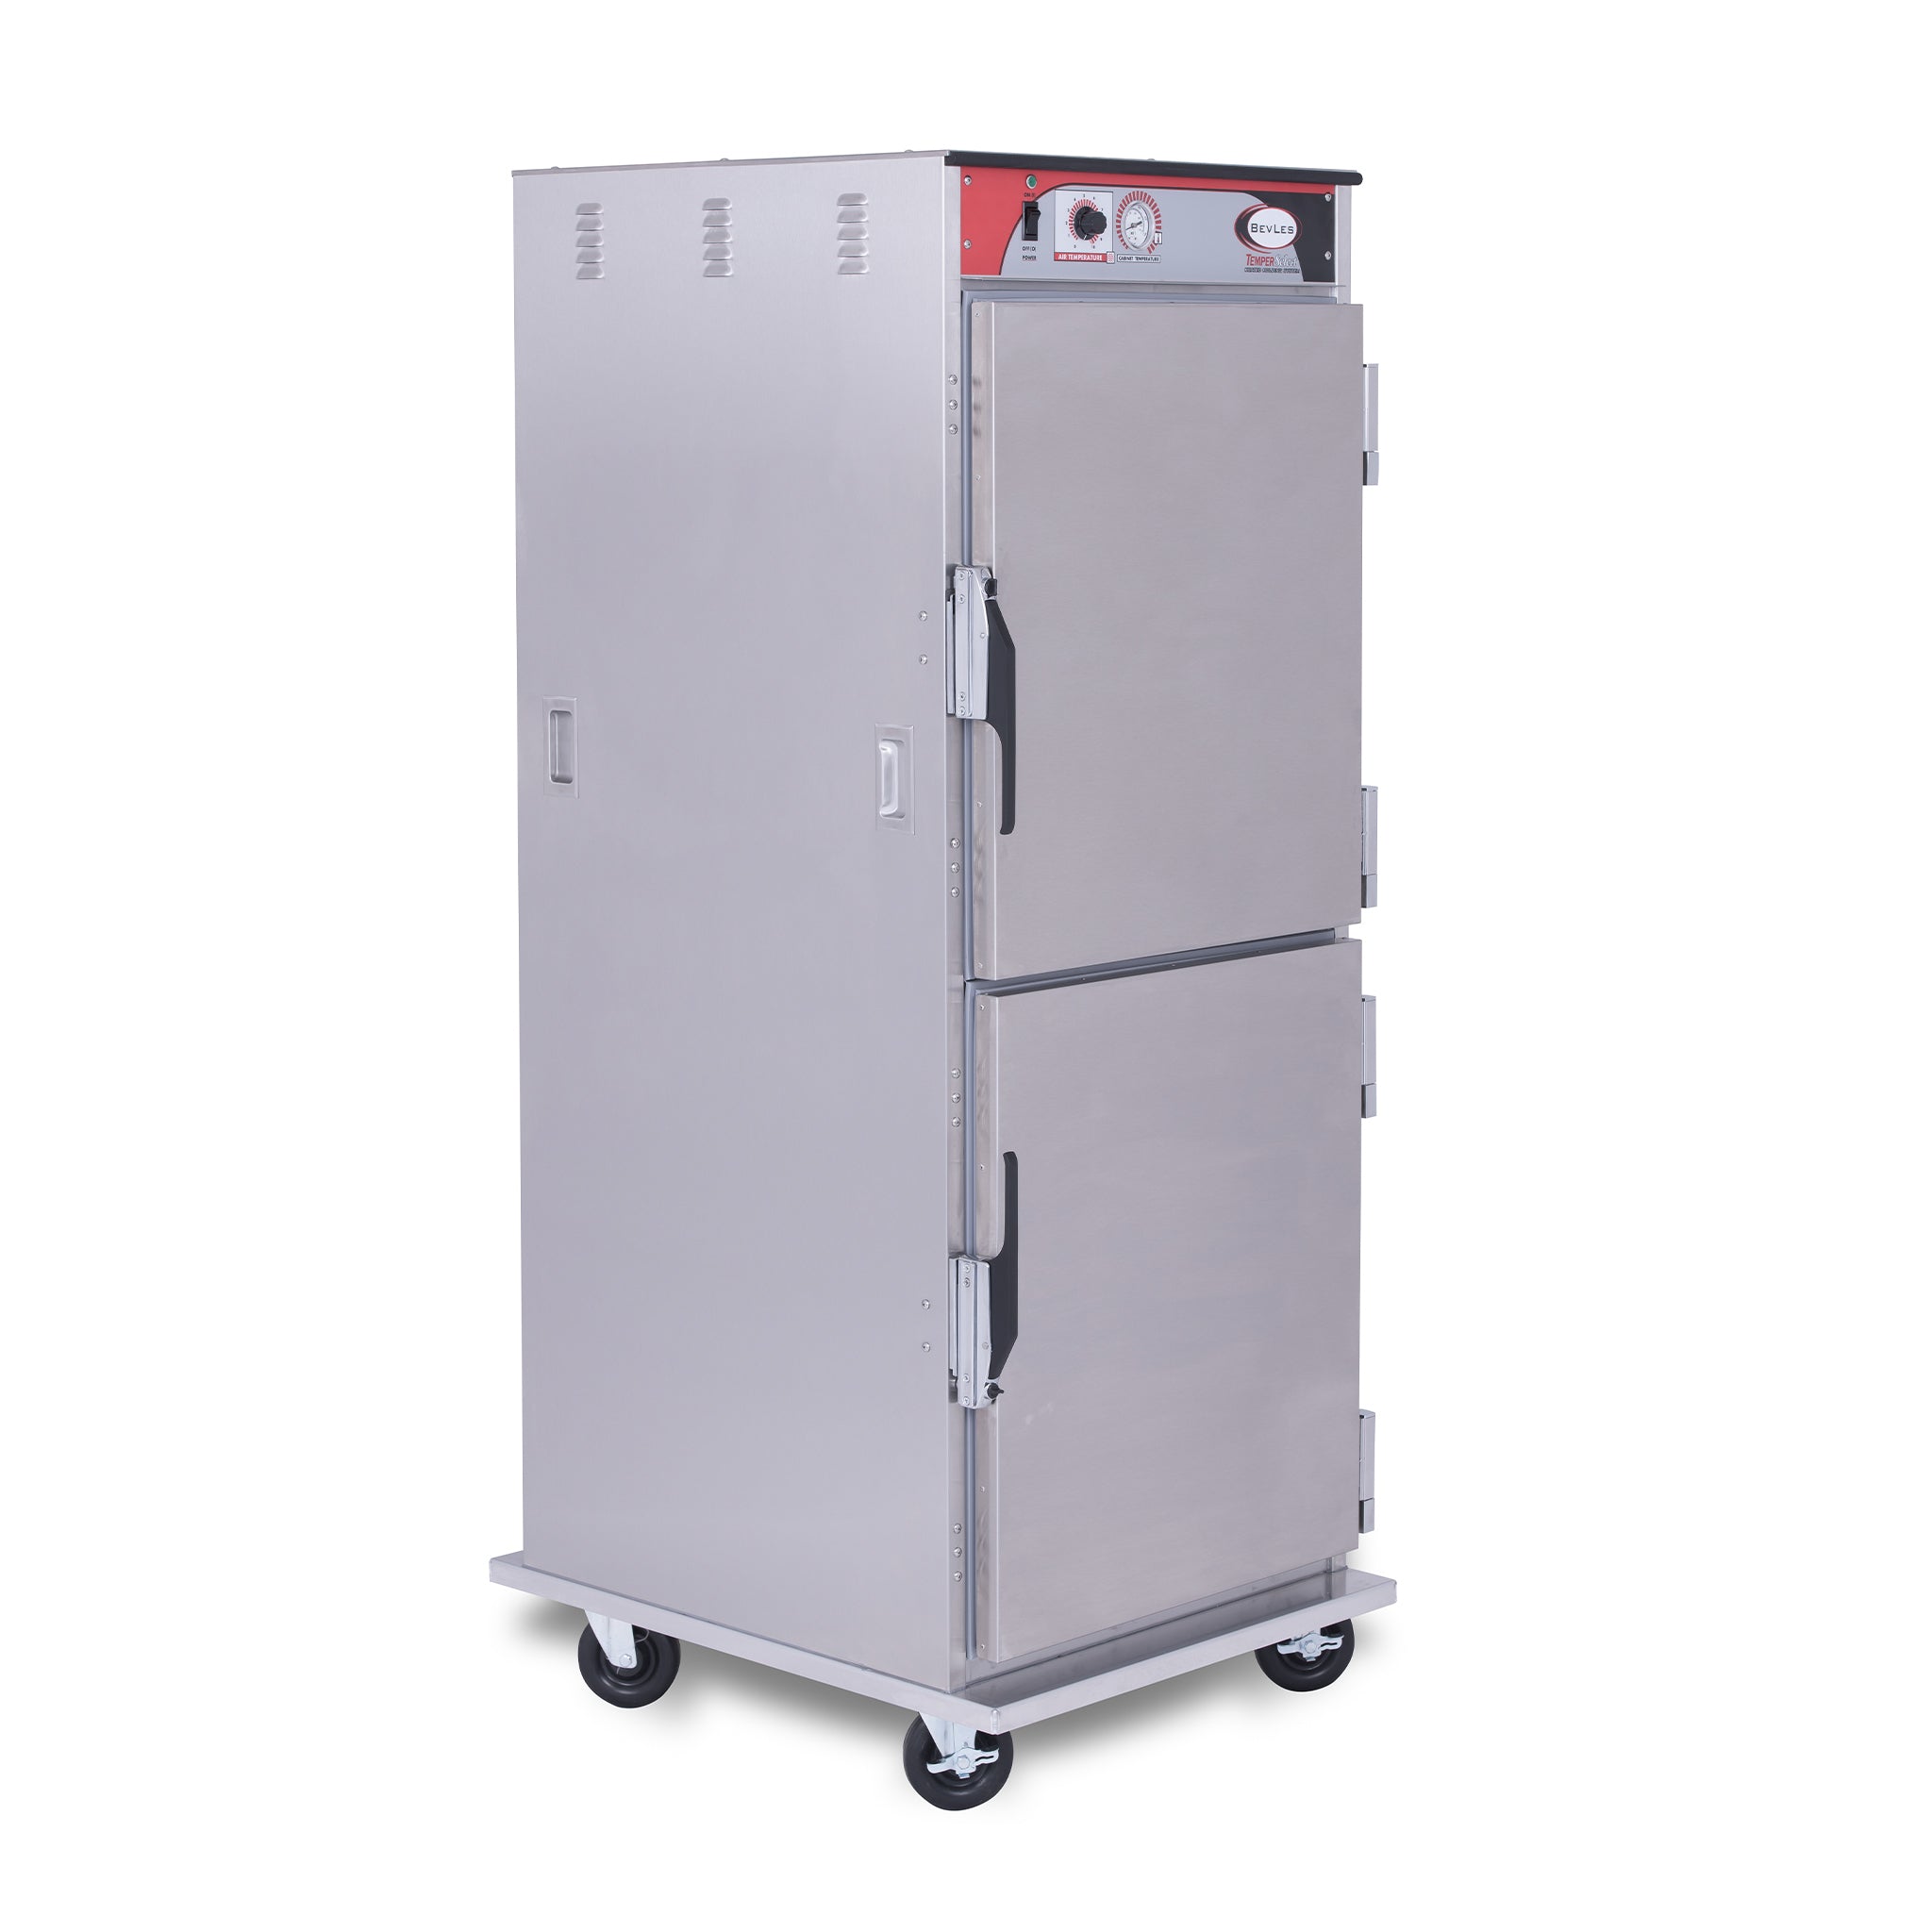 BevLes - HTSS74P164-PT, BevLes Temper Select - Pass Thru Full Size Heated Holding Cabinet, Narrow Width, 230V, in Silver